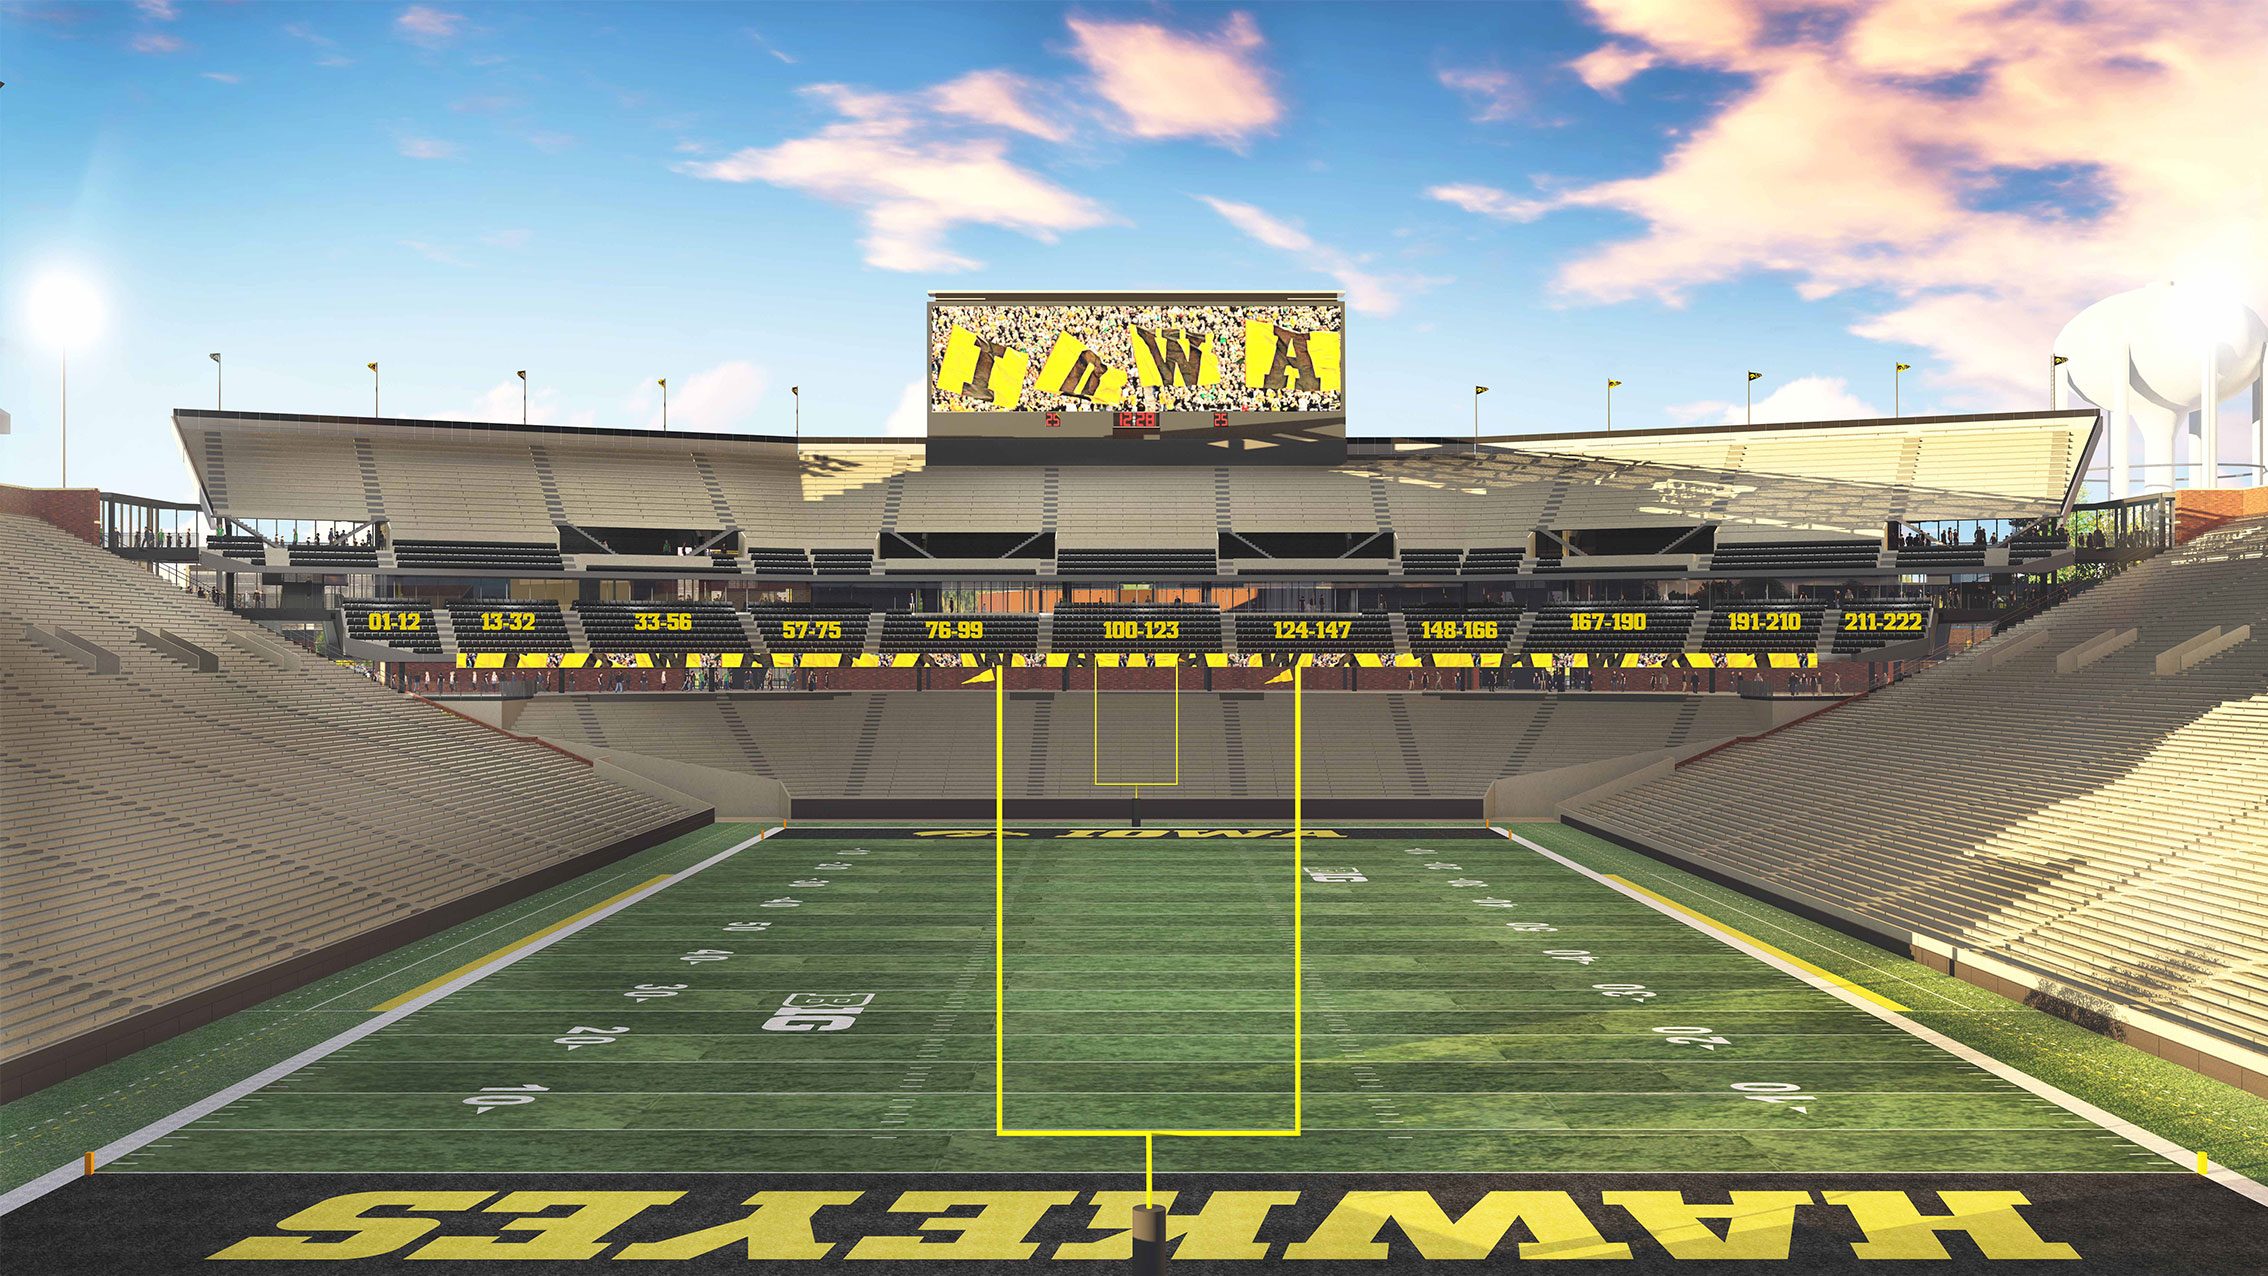 Kinnick Stadium Seating Chart With Rows